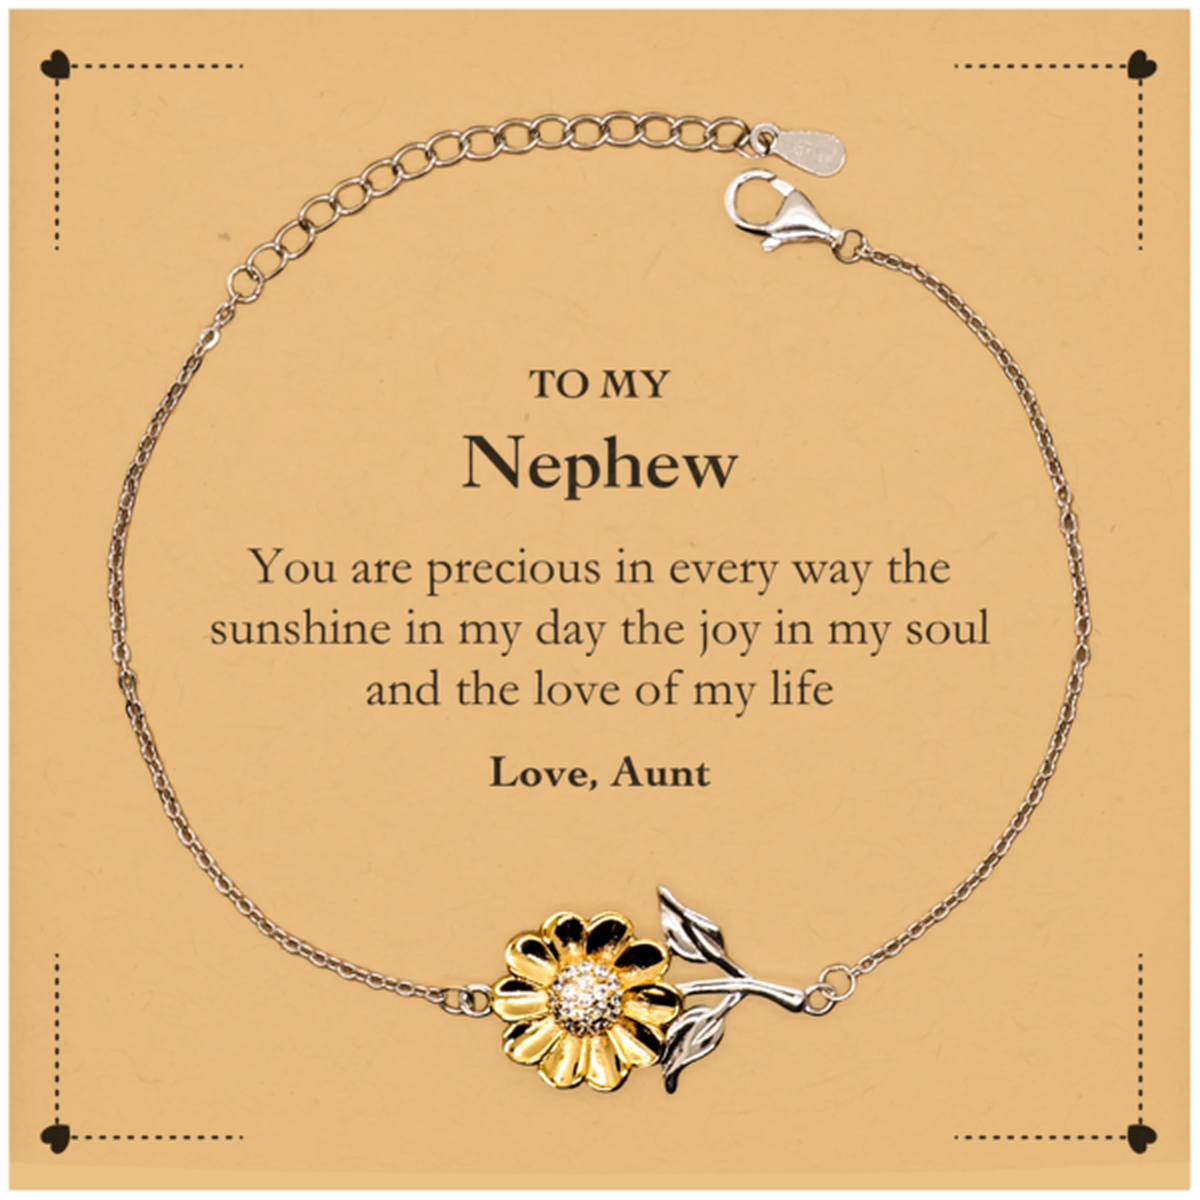 Graduation Gifts for Nephew Sunflower Bracelet Present from Aunt, Christmas Nephew Birthday Gifts Nephew You are precious in every way the sunshine in my day. Love, Aunt